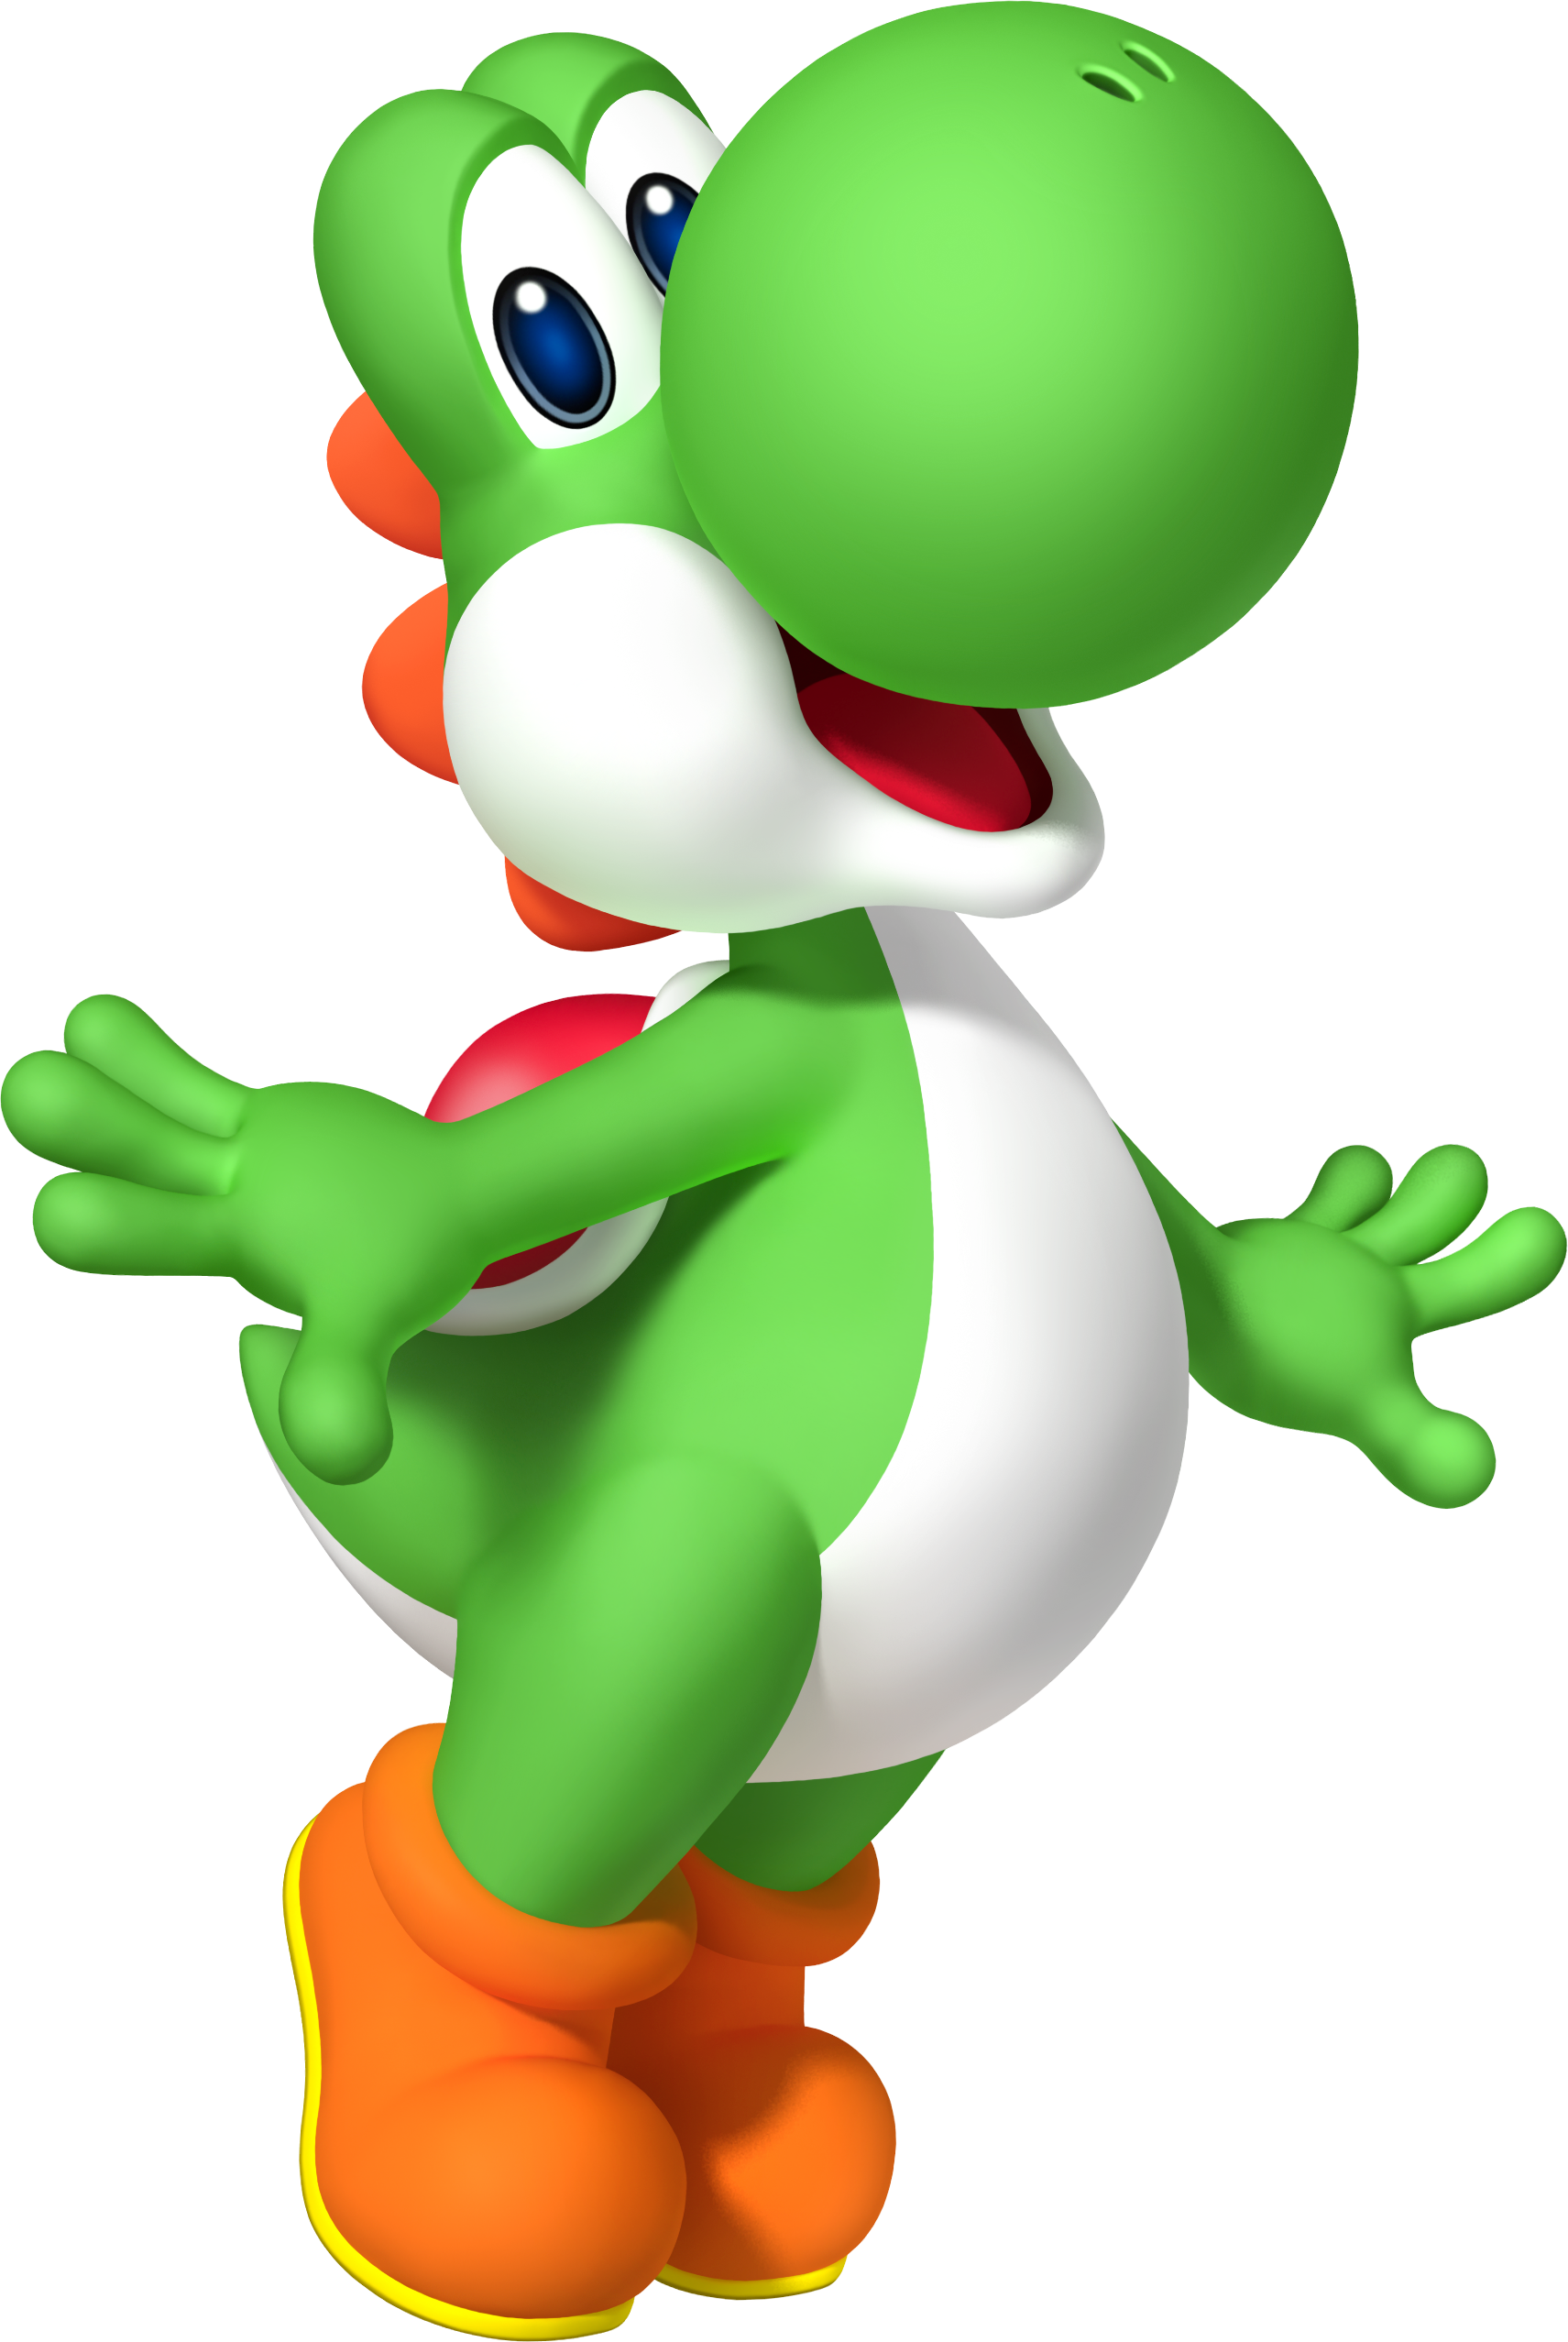 Yoshi (Super Mario character) | Ultimate Pop Culture Wiki | FANDOM powered by Wikia